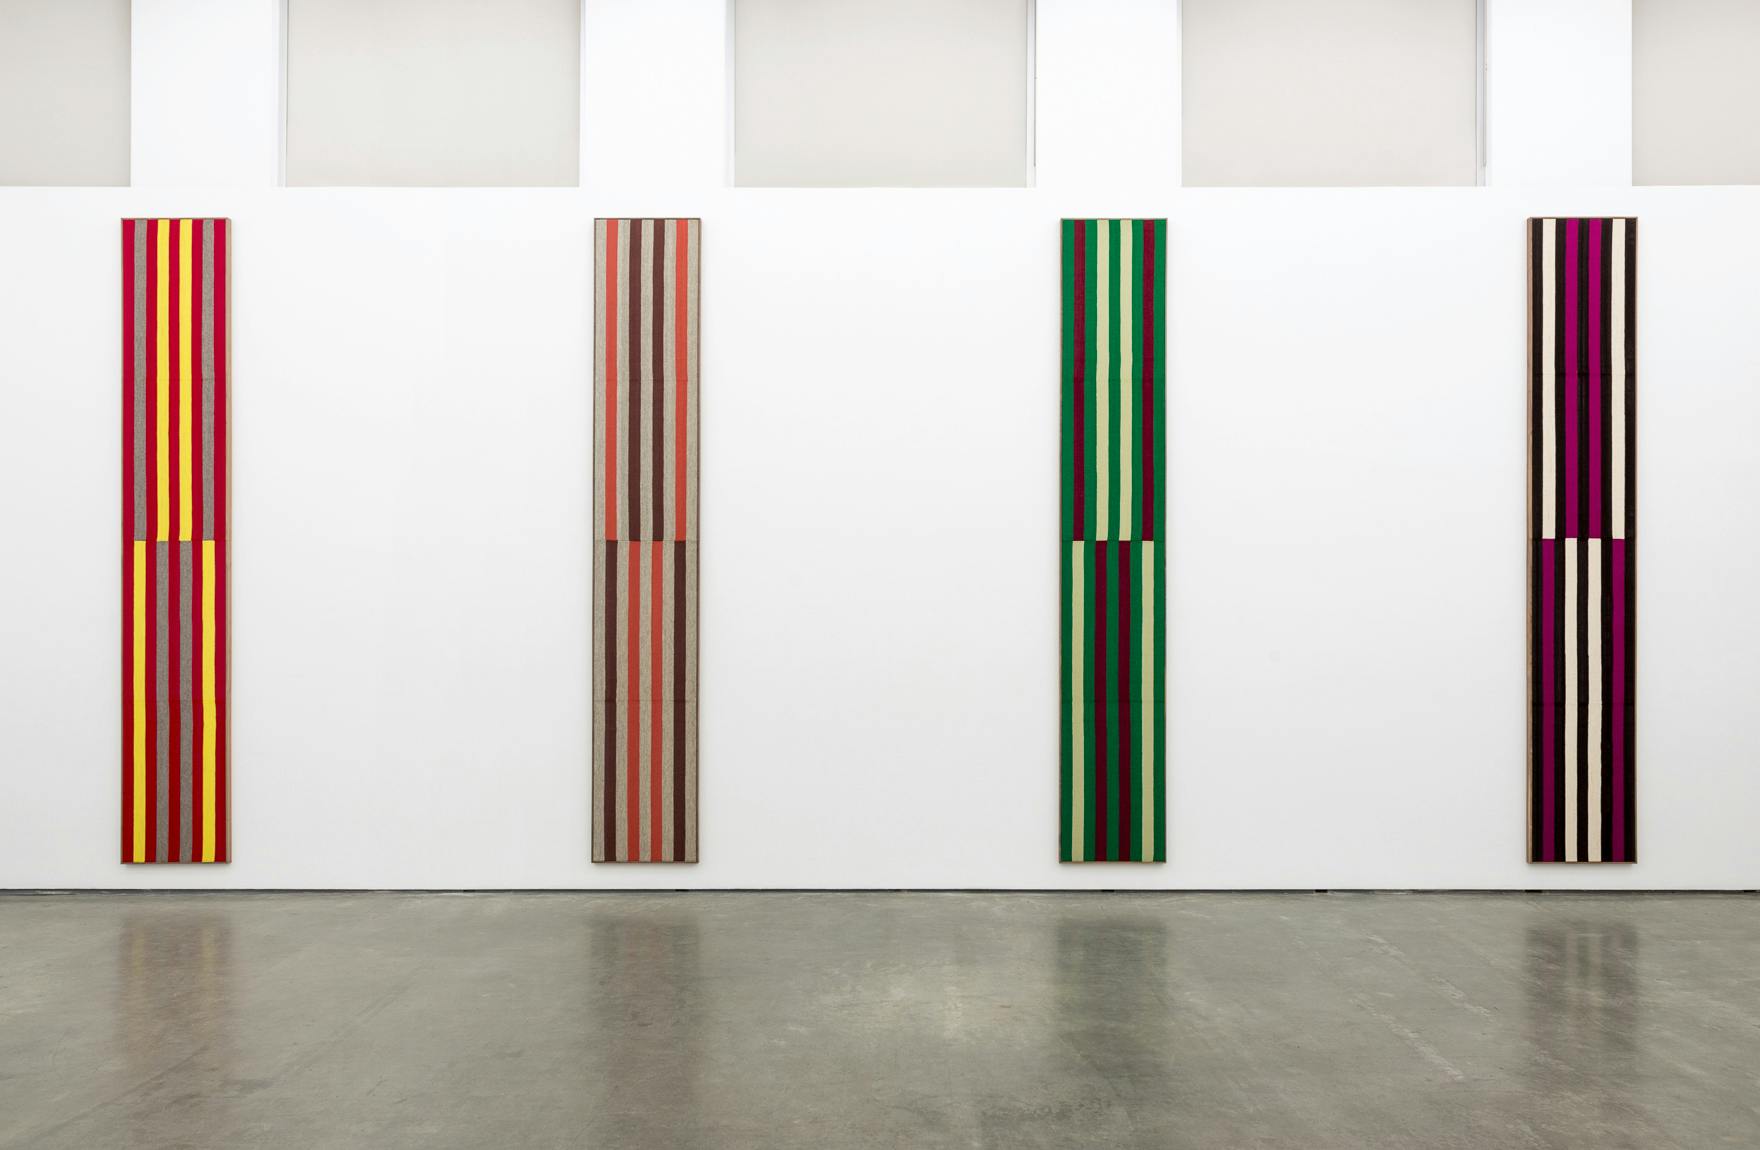 Installation image of Brent Wadden’s exhibition Two Scores. Four striped woven works stretched onto narrow, rectangular panels hang vertically on a gallery wall. 